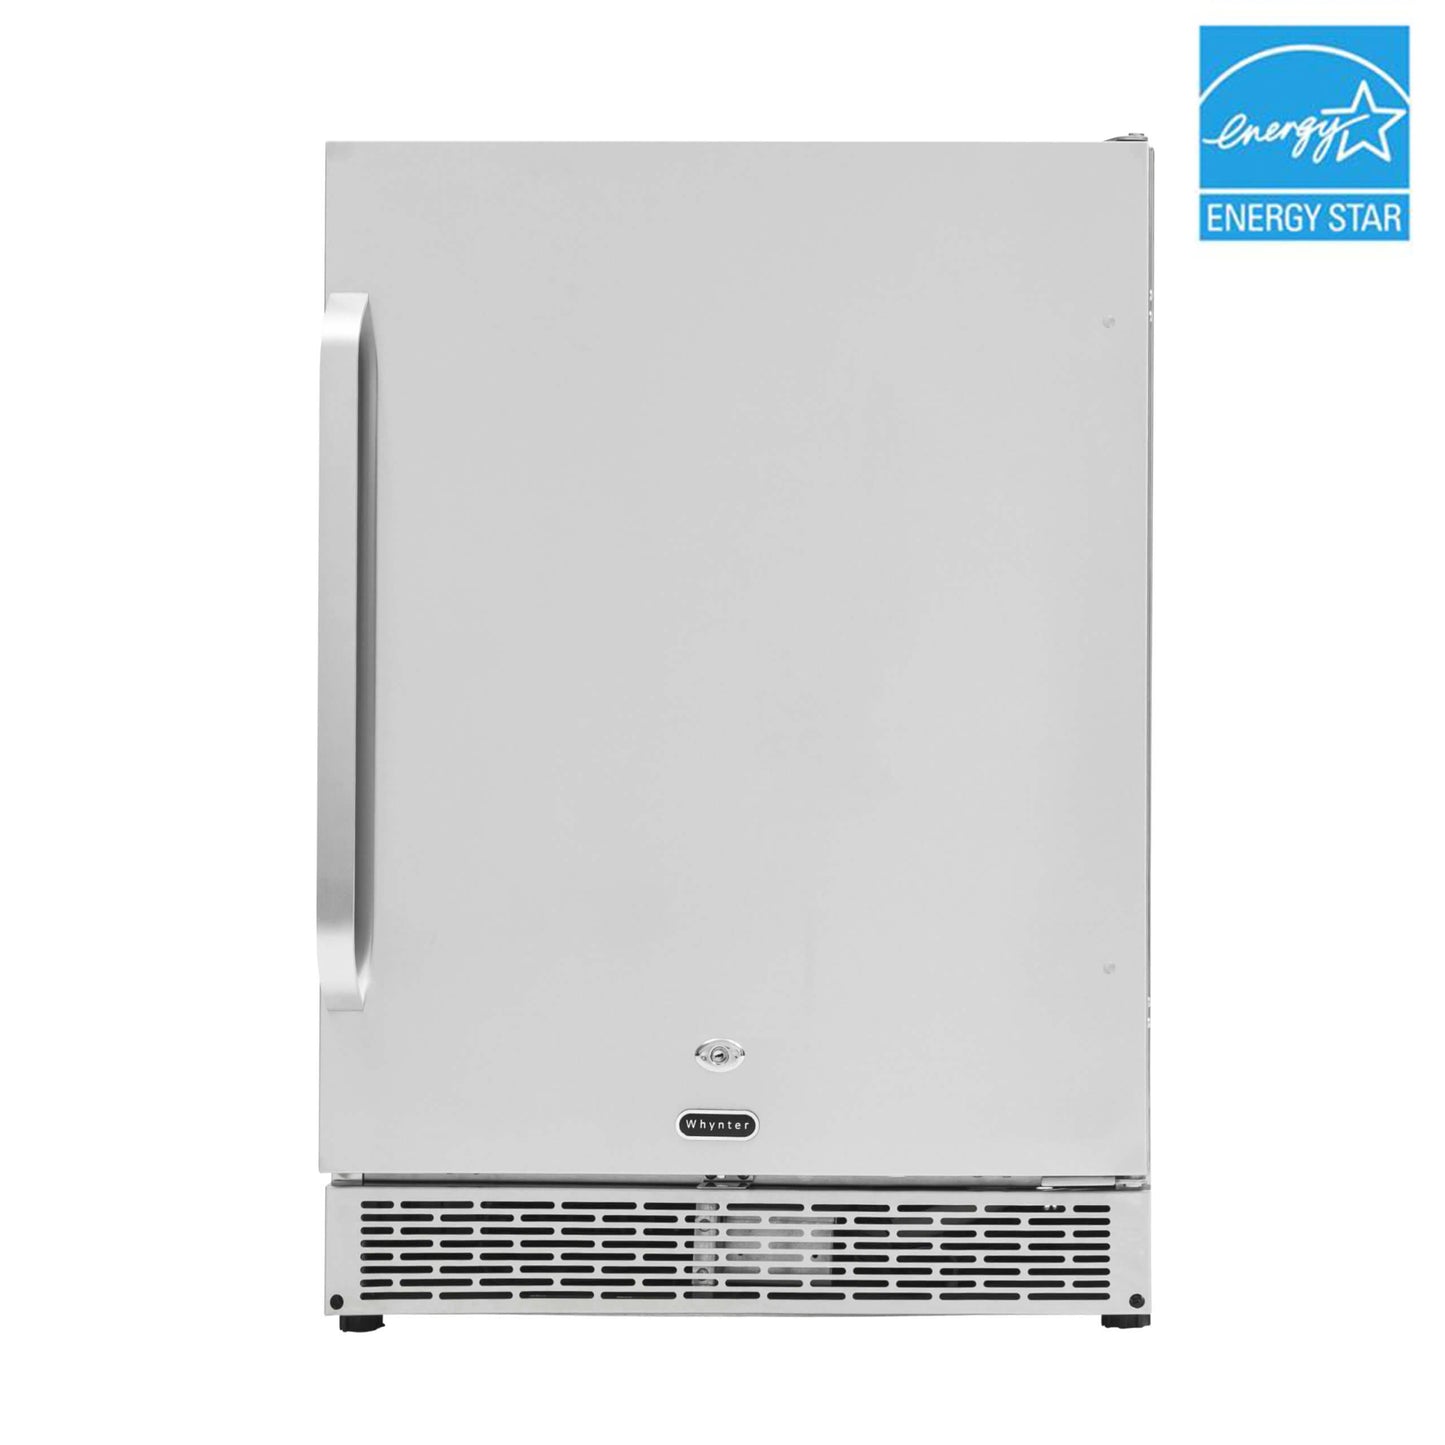 Whynter Refrigerators Whynter BOR-53024-SSW/BOR-53024-SSWa Energy Star 24″ Built-in Outdoor 5.3 cu.ft. Beverage Refrigerator Cooler Full Stainless Steel Exterior with Lock and Optional Caster Wheels